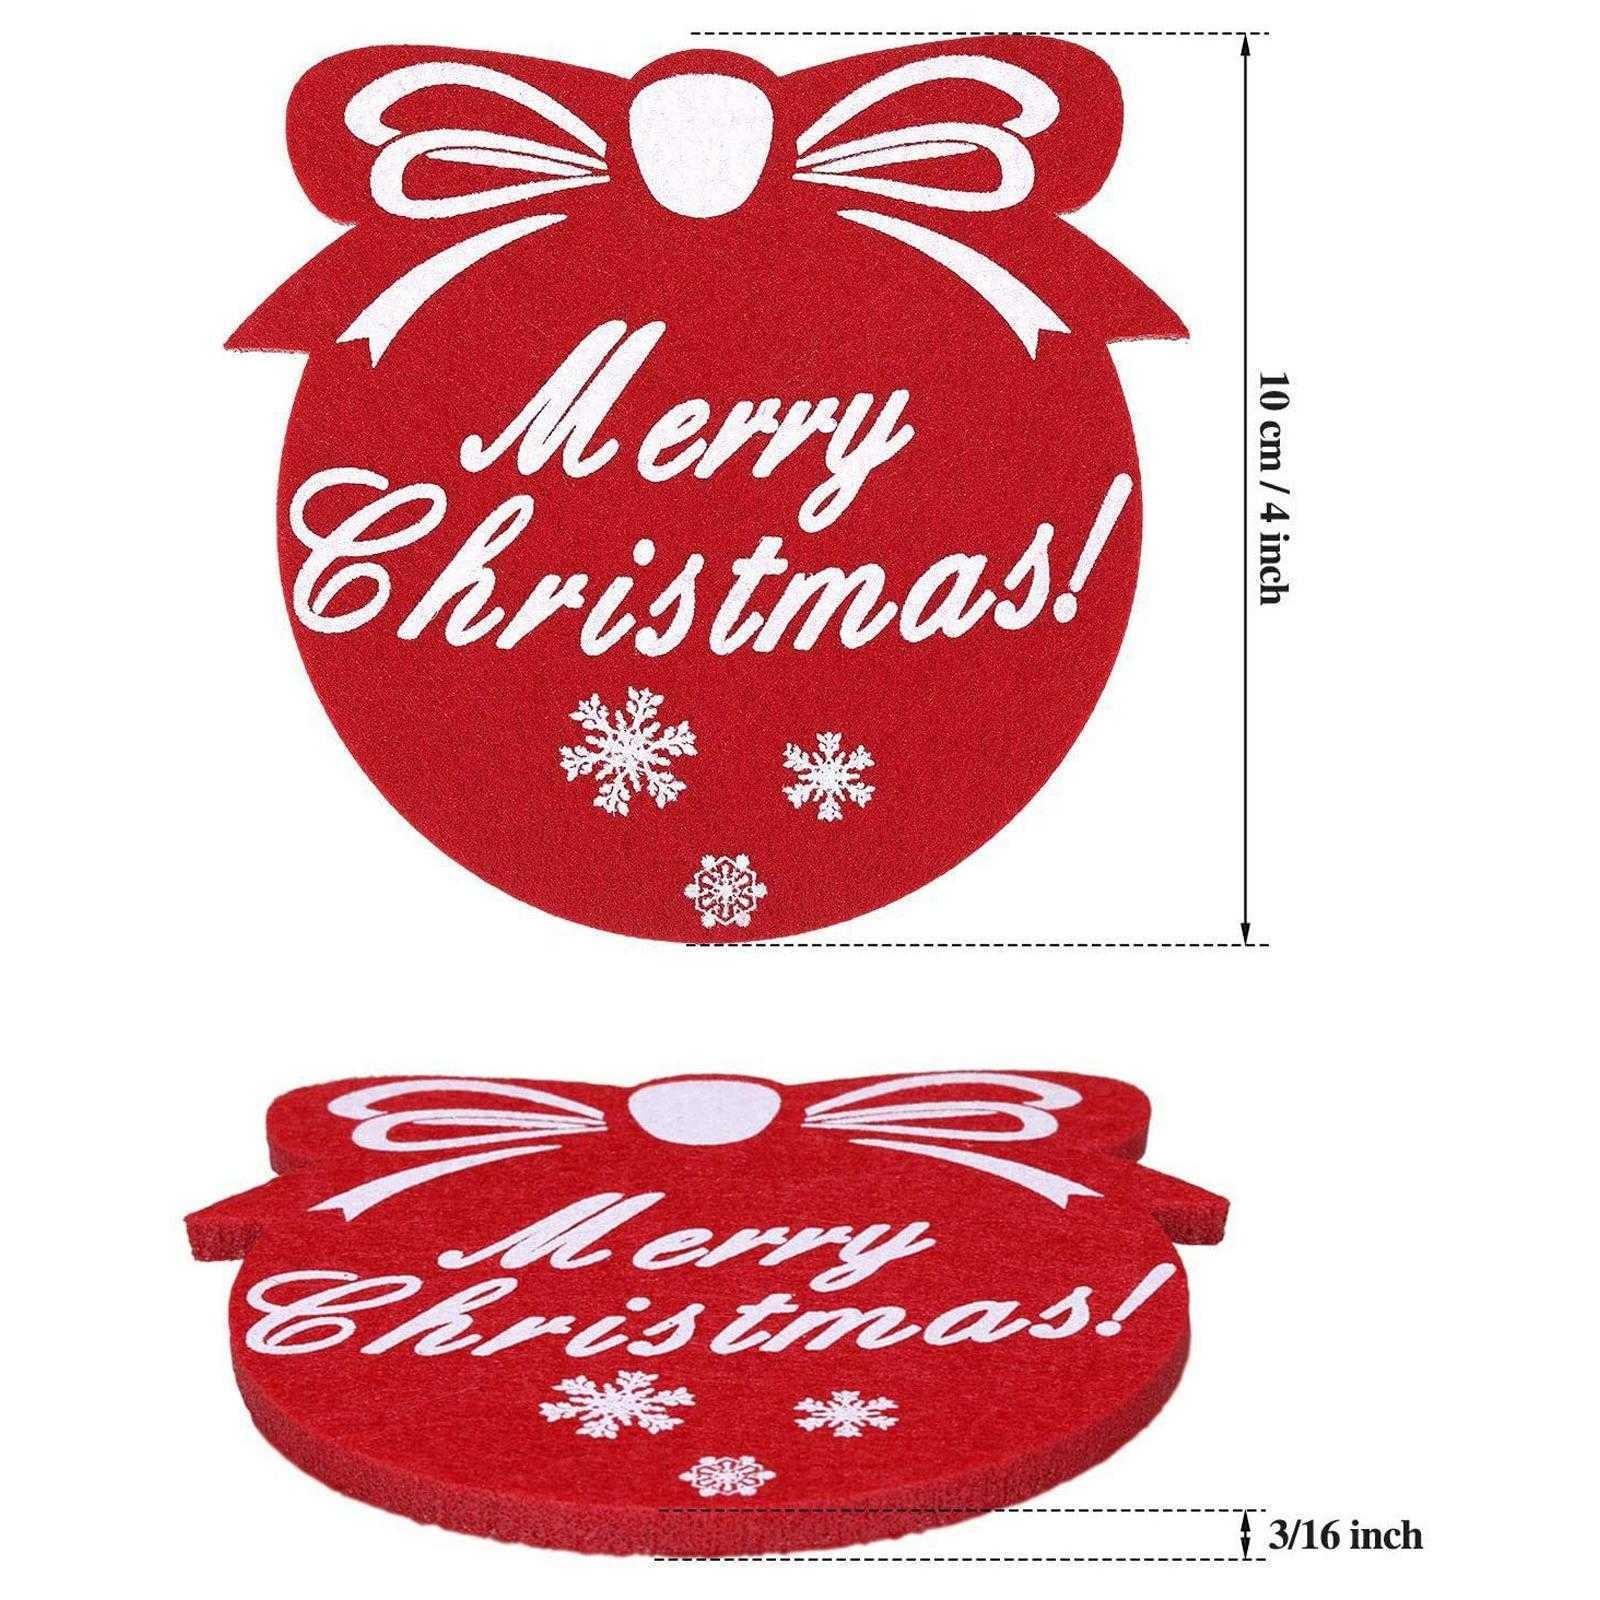 Mugs Christmas Cup Pad Felt Coaster Xmas Drinks Party Home Kitchen Decoration Table Dining Ornament Y2210